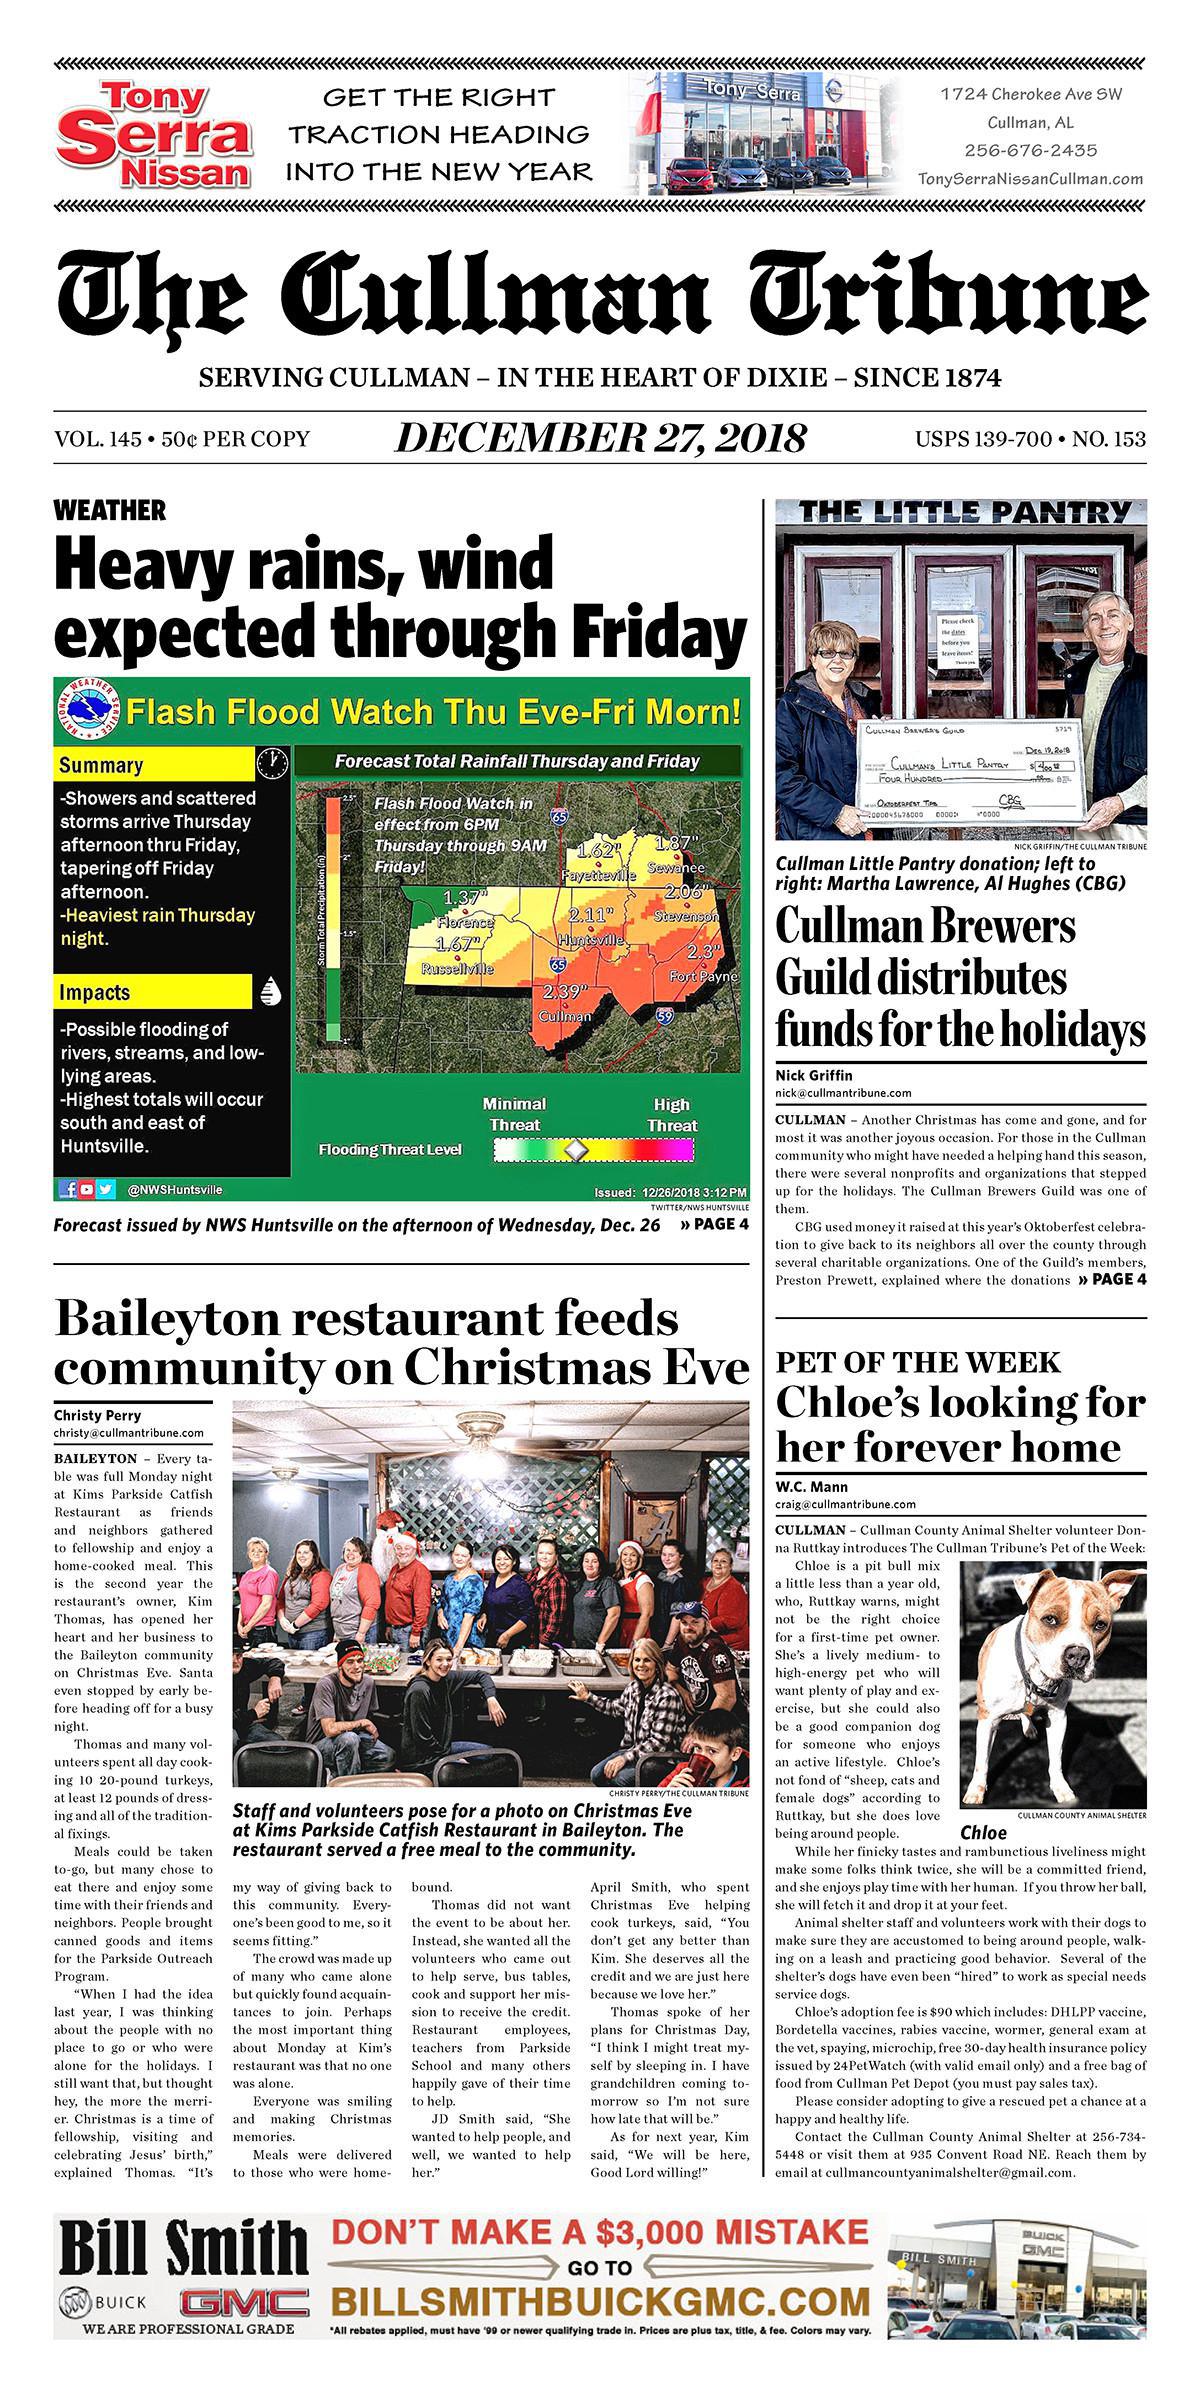 Good Morning Cullman! The 12-27-2018 edition of the Cullman Tribune is now ready to view